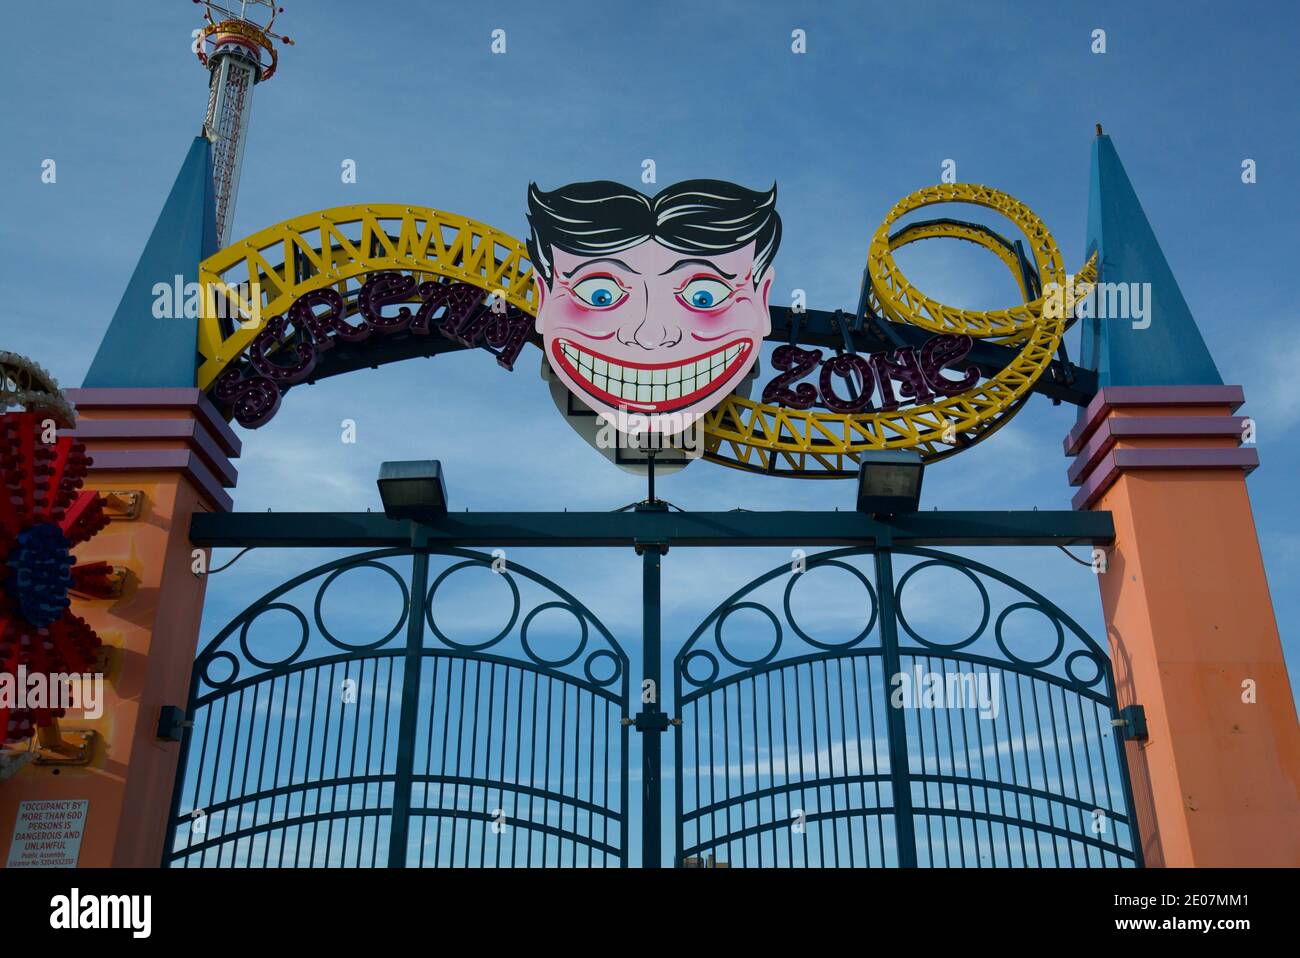 Entrance gate to Coney Island Scream Zone, New York, Amusement Park, showing the smiling man AKA The Steeplechase Face or 'Tillie'. Stock Photo